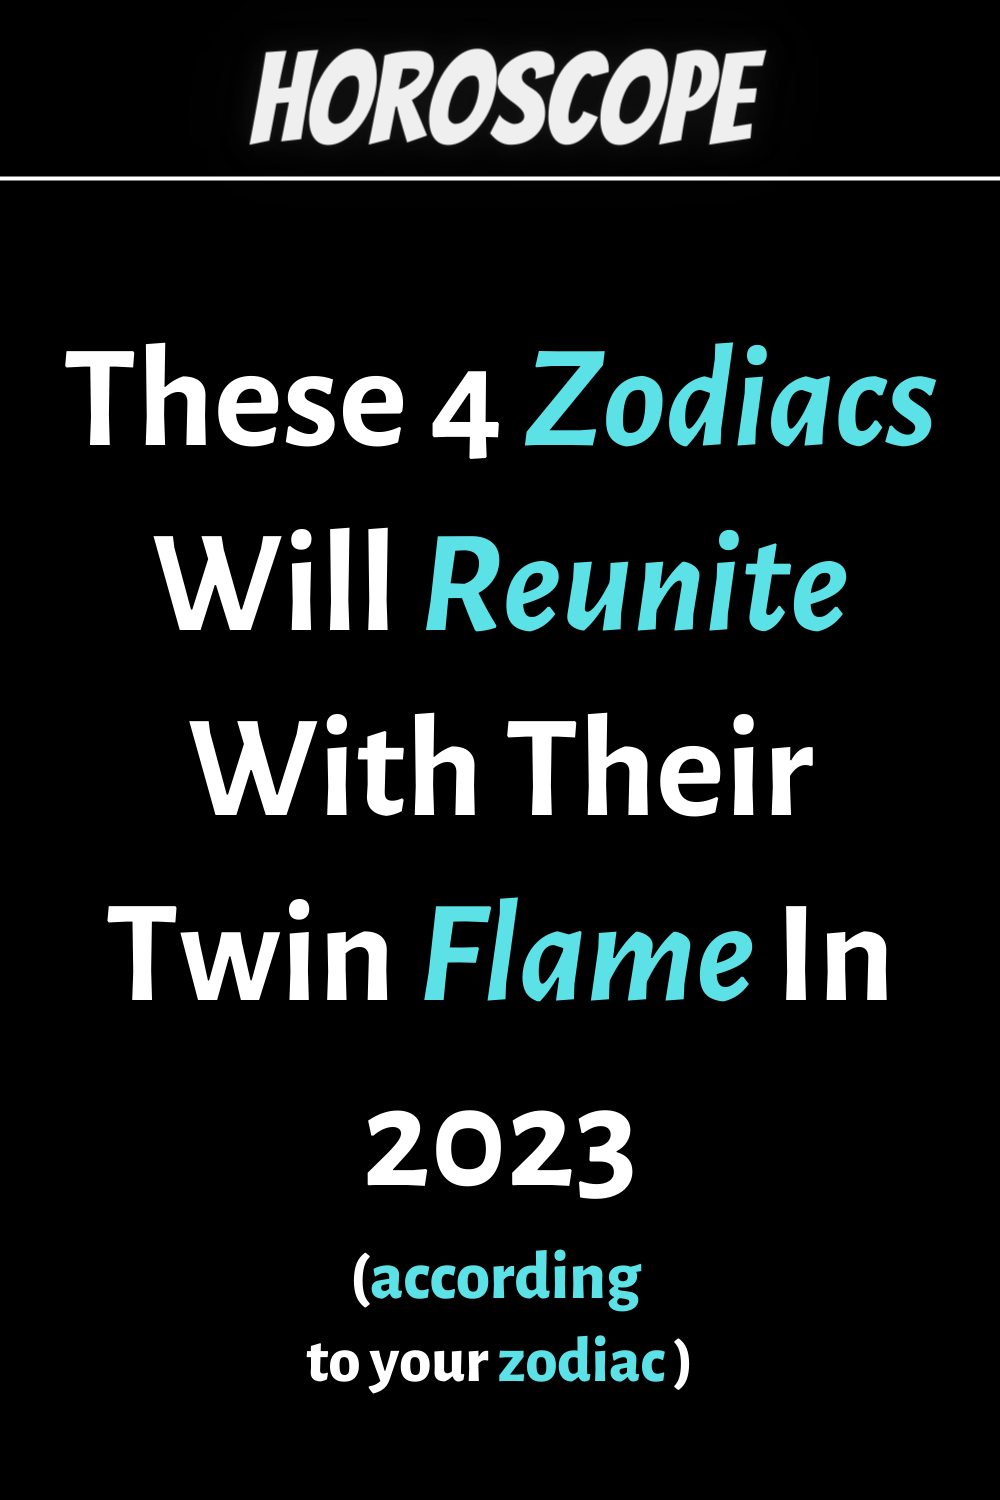 These 4 Zodiacs Will Reunite With Their Twin Flame In 2023